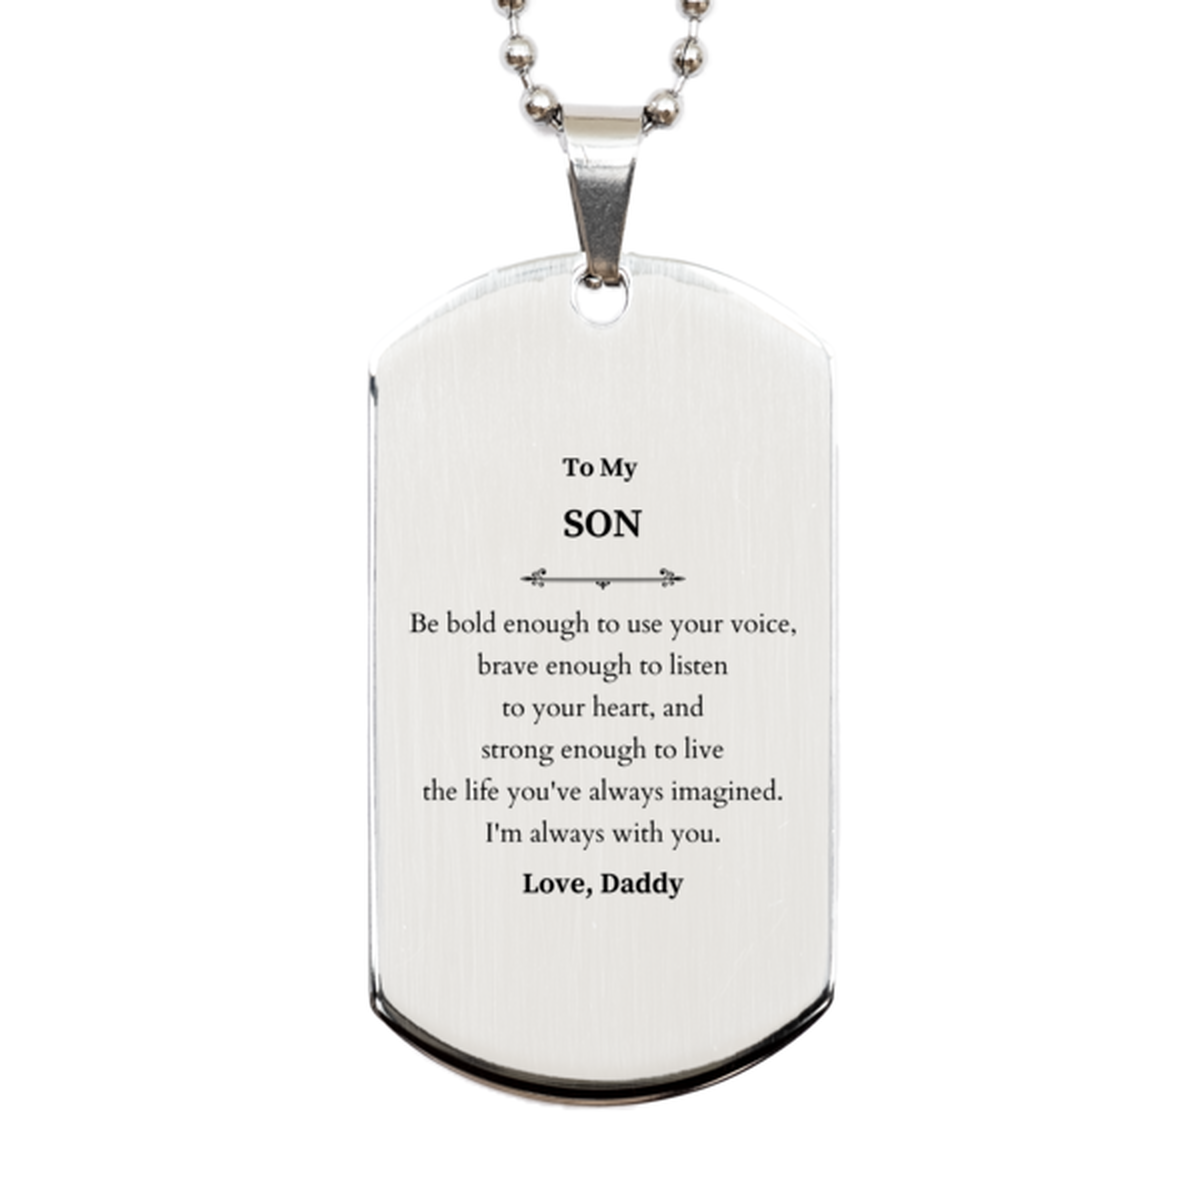 Keepsake Son Silver Dog Tag Gift Idea Graduation Christmas Birthday Son from Daddy, Son Be bold enough to use your voice, brave enough to listen to your heart. Love, Daddy